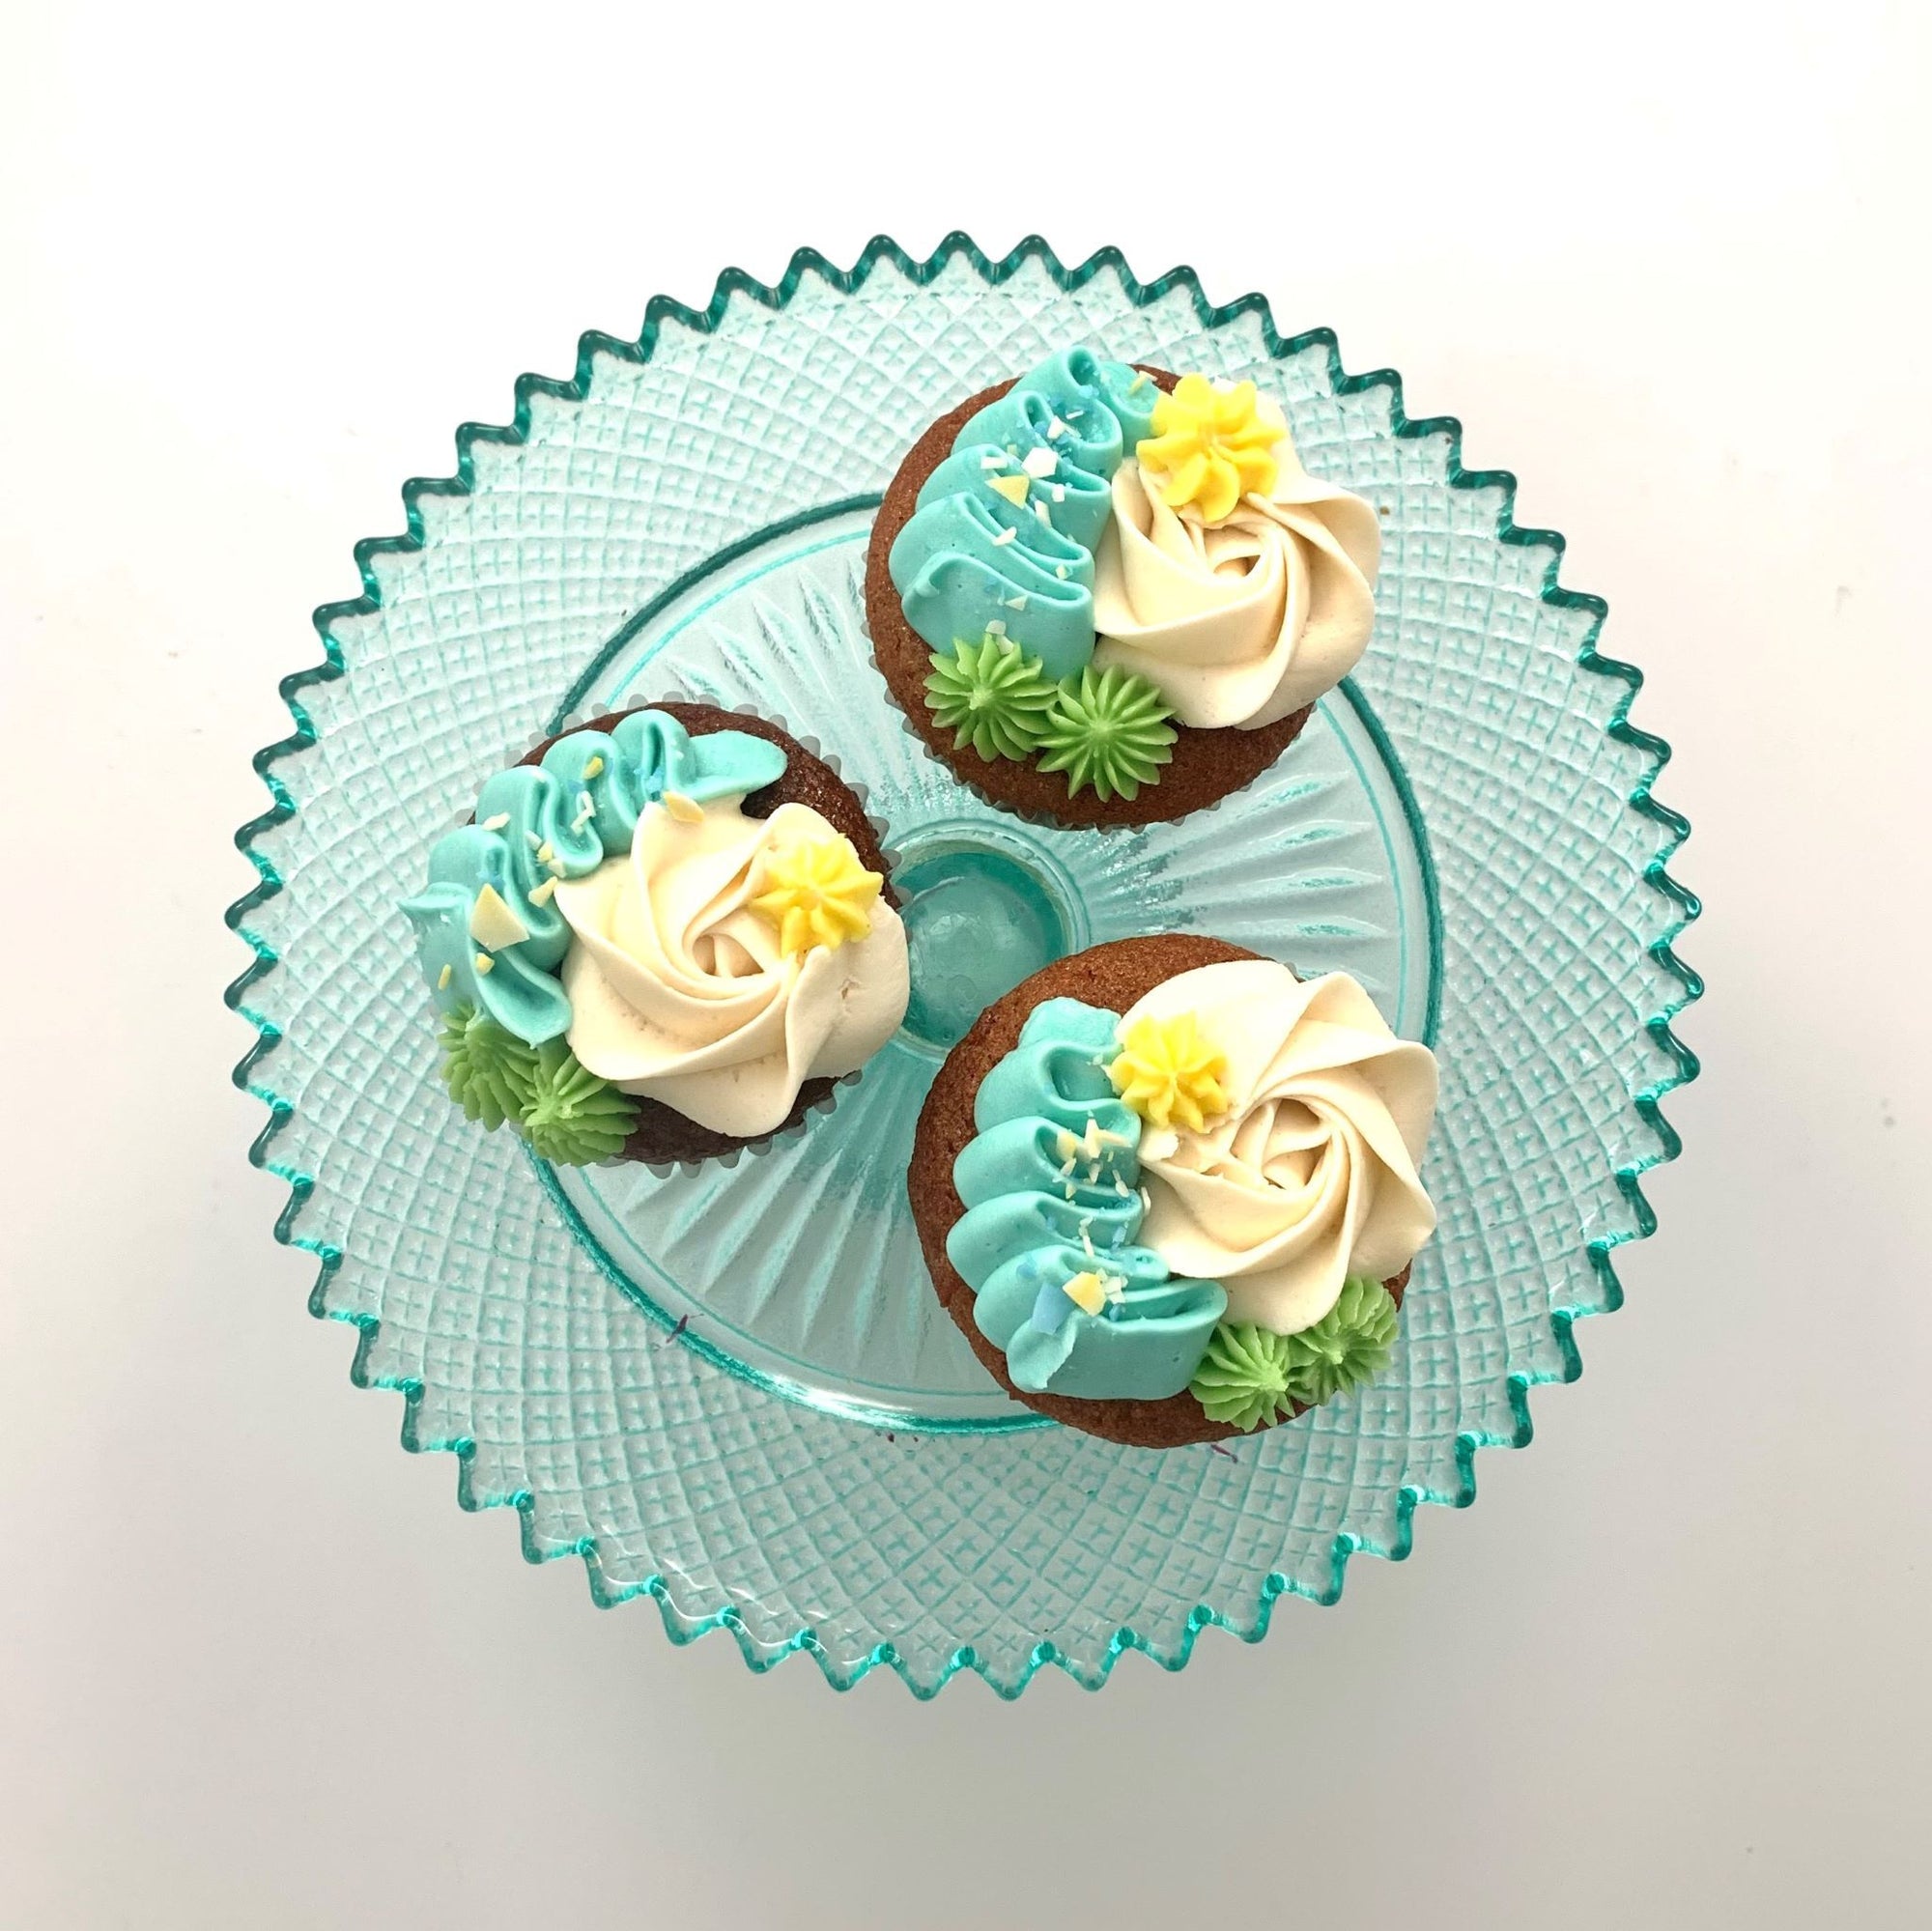 fancy cupcakes